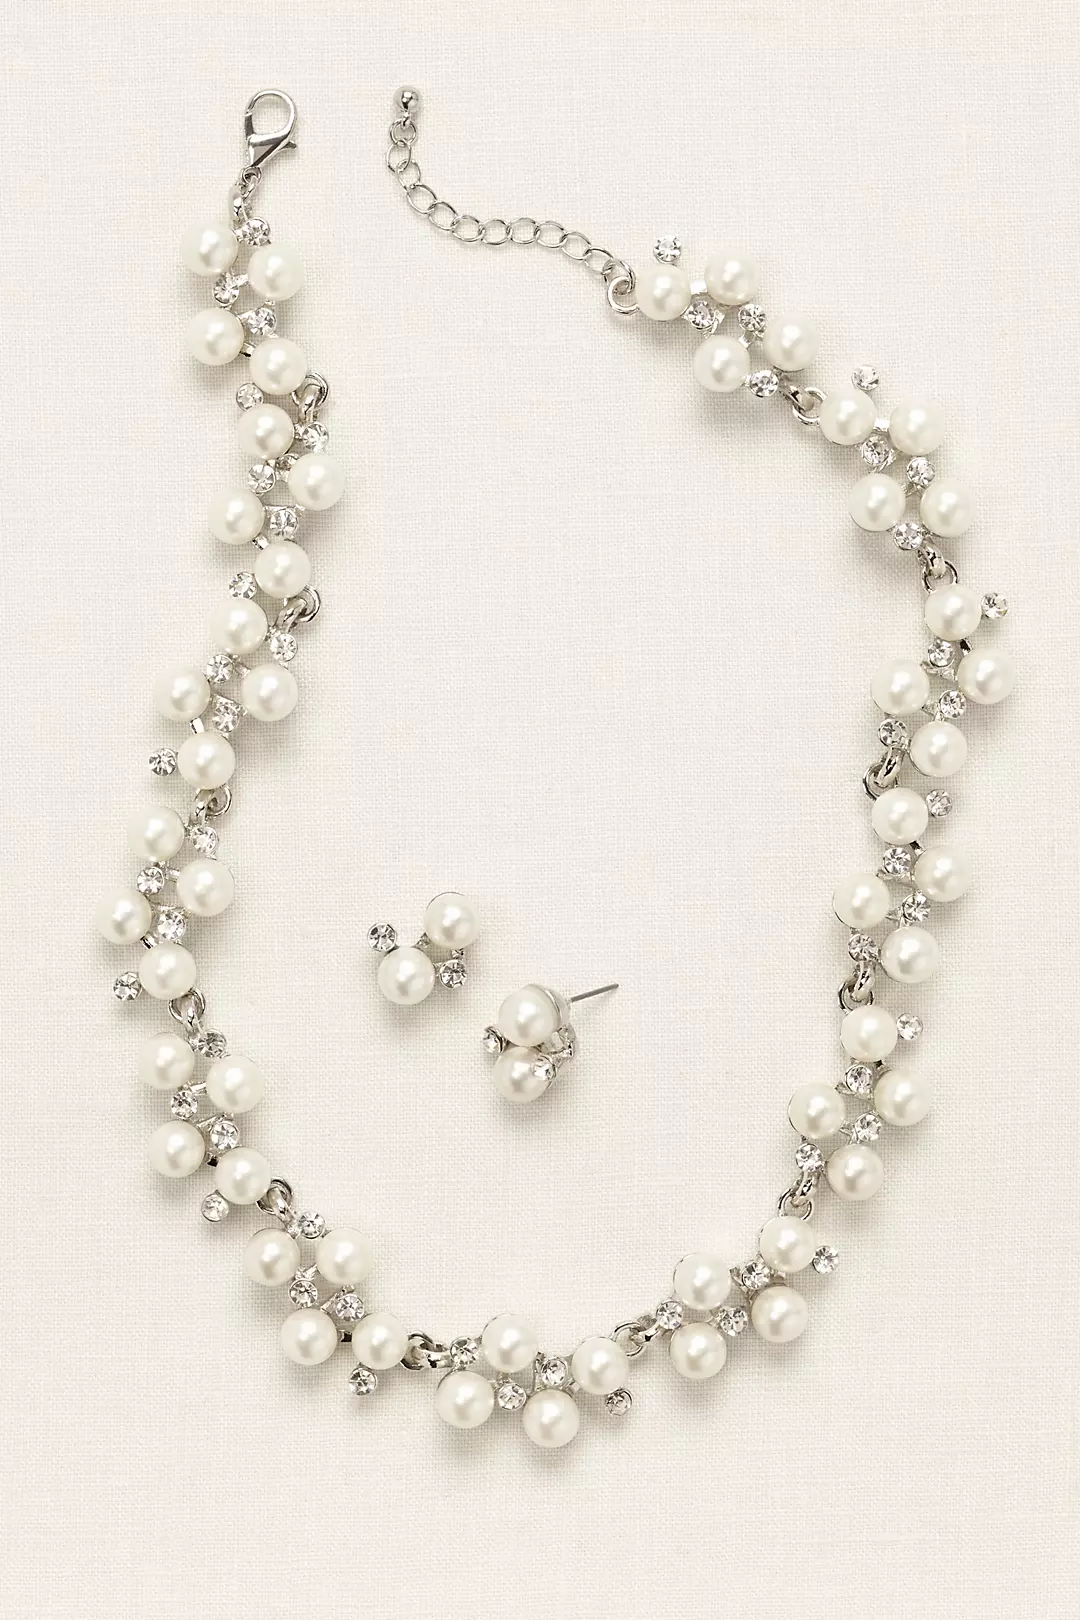 Pearl Rhinestone Vine Necklace and Earring Set Image 2